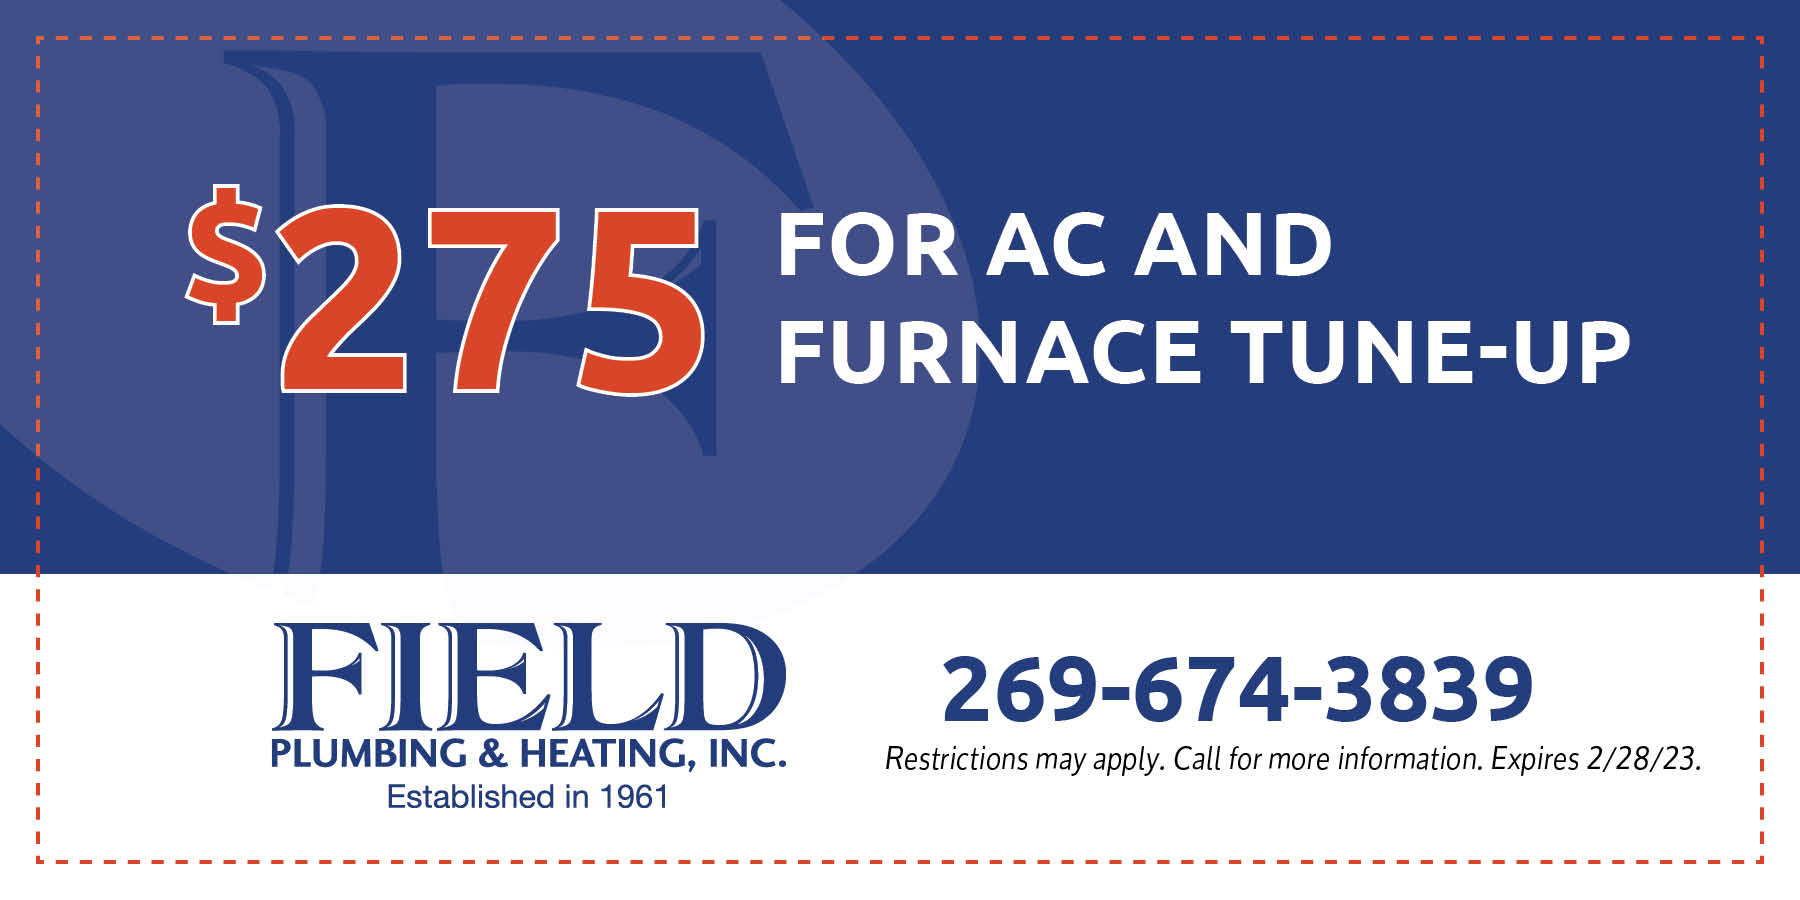 $275 FOR AC AND FURNACE TUNE-UP. Expires 2/28/23.